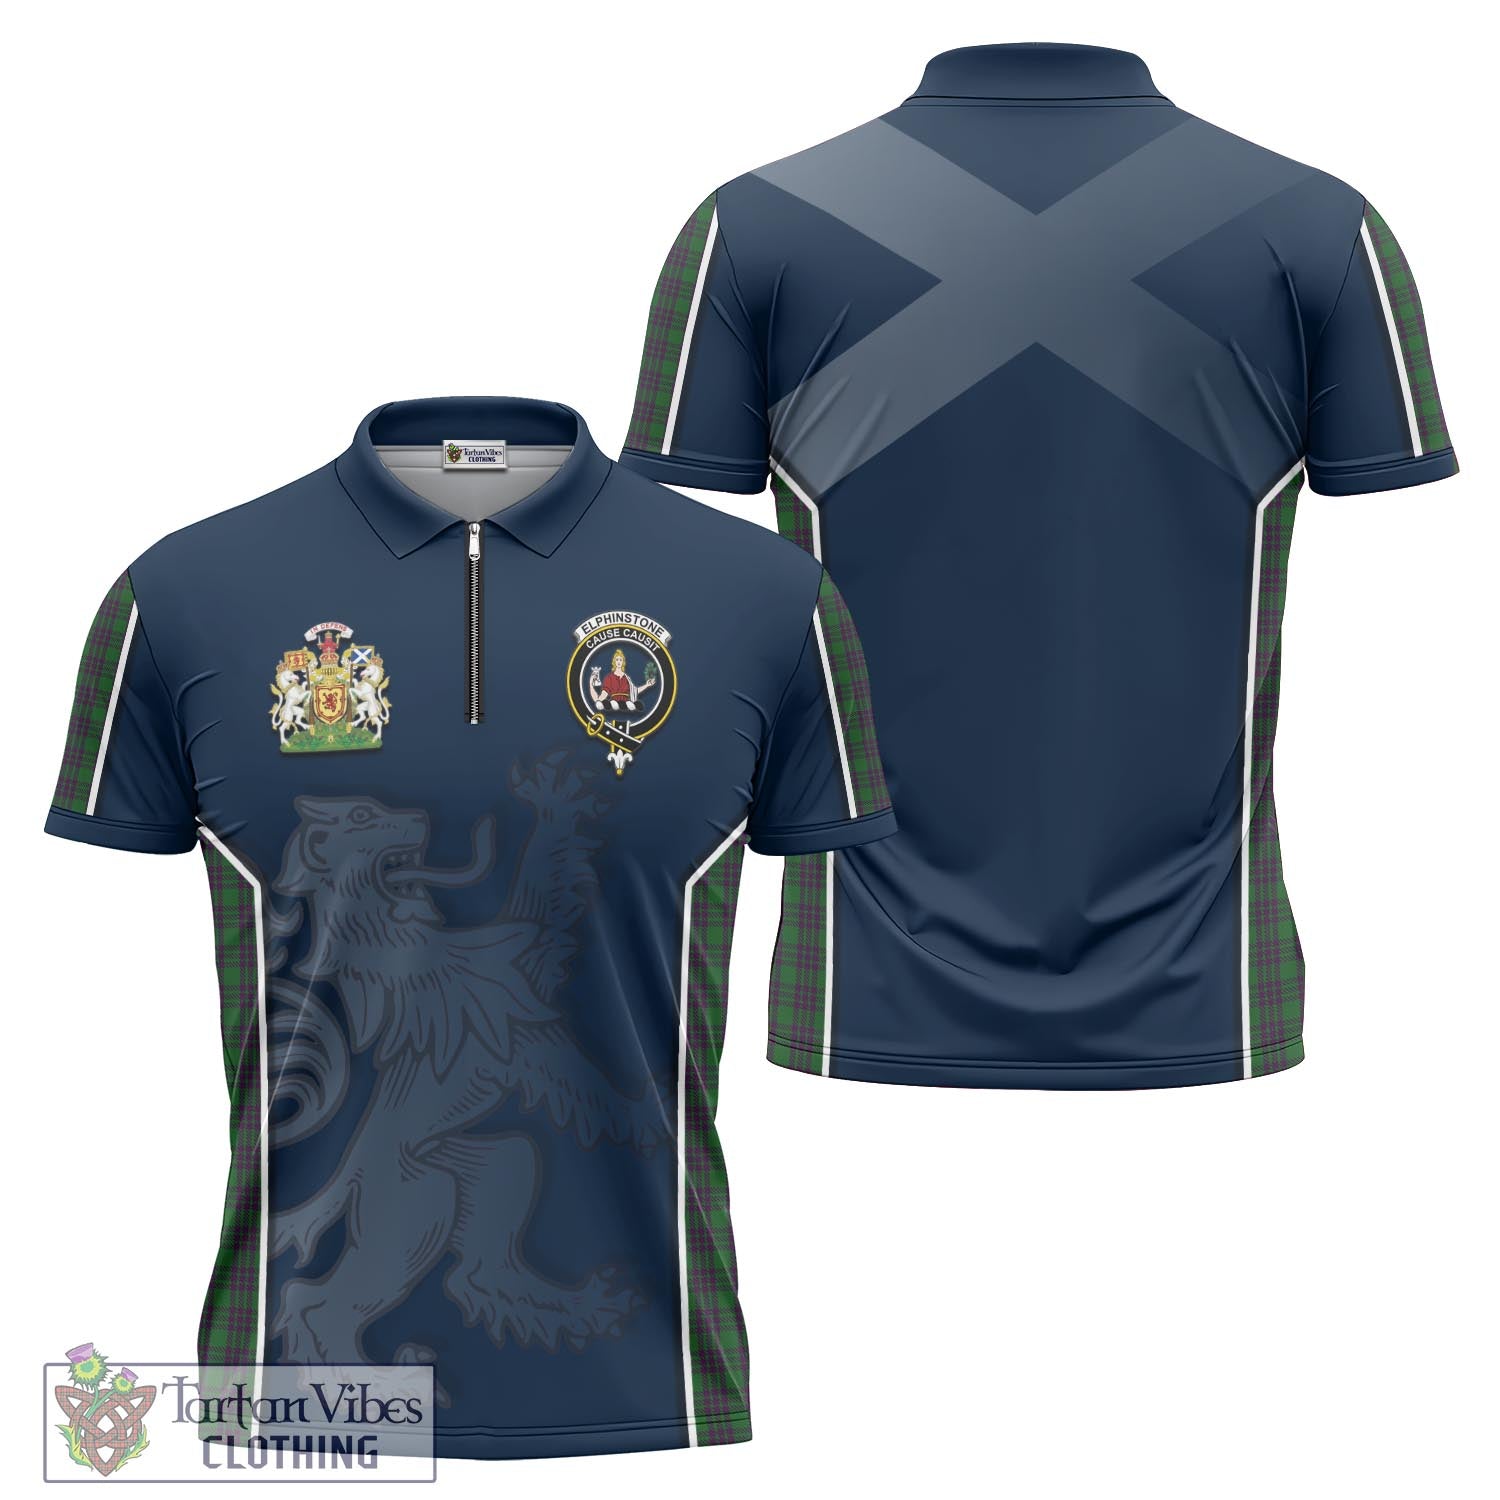 Tartan Vibes Clothing Elphinstone Tartan Zipper Polo Shirt with Family Crest and Lion Rampant Vibes Sport Style